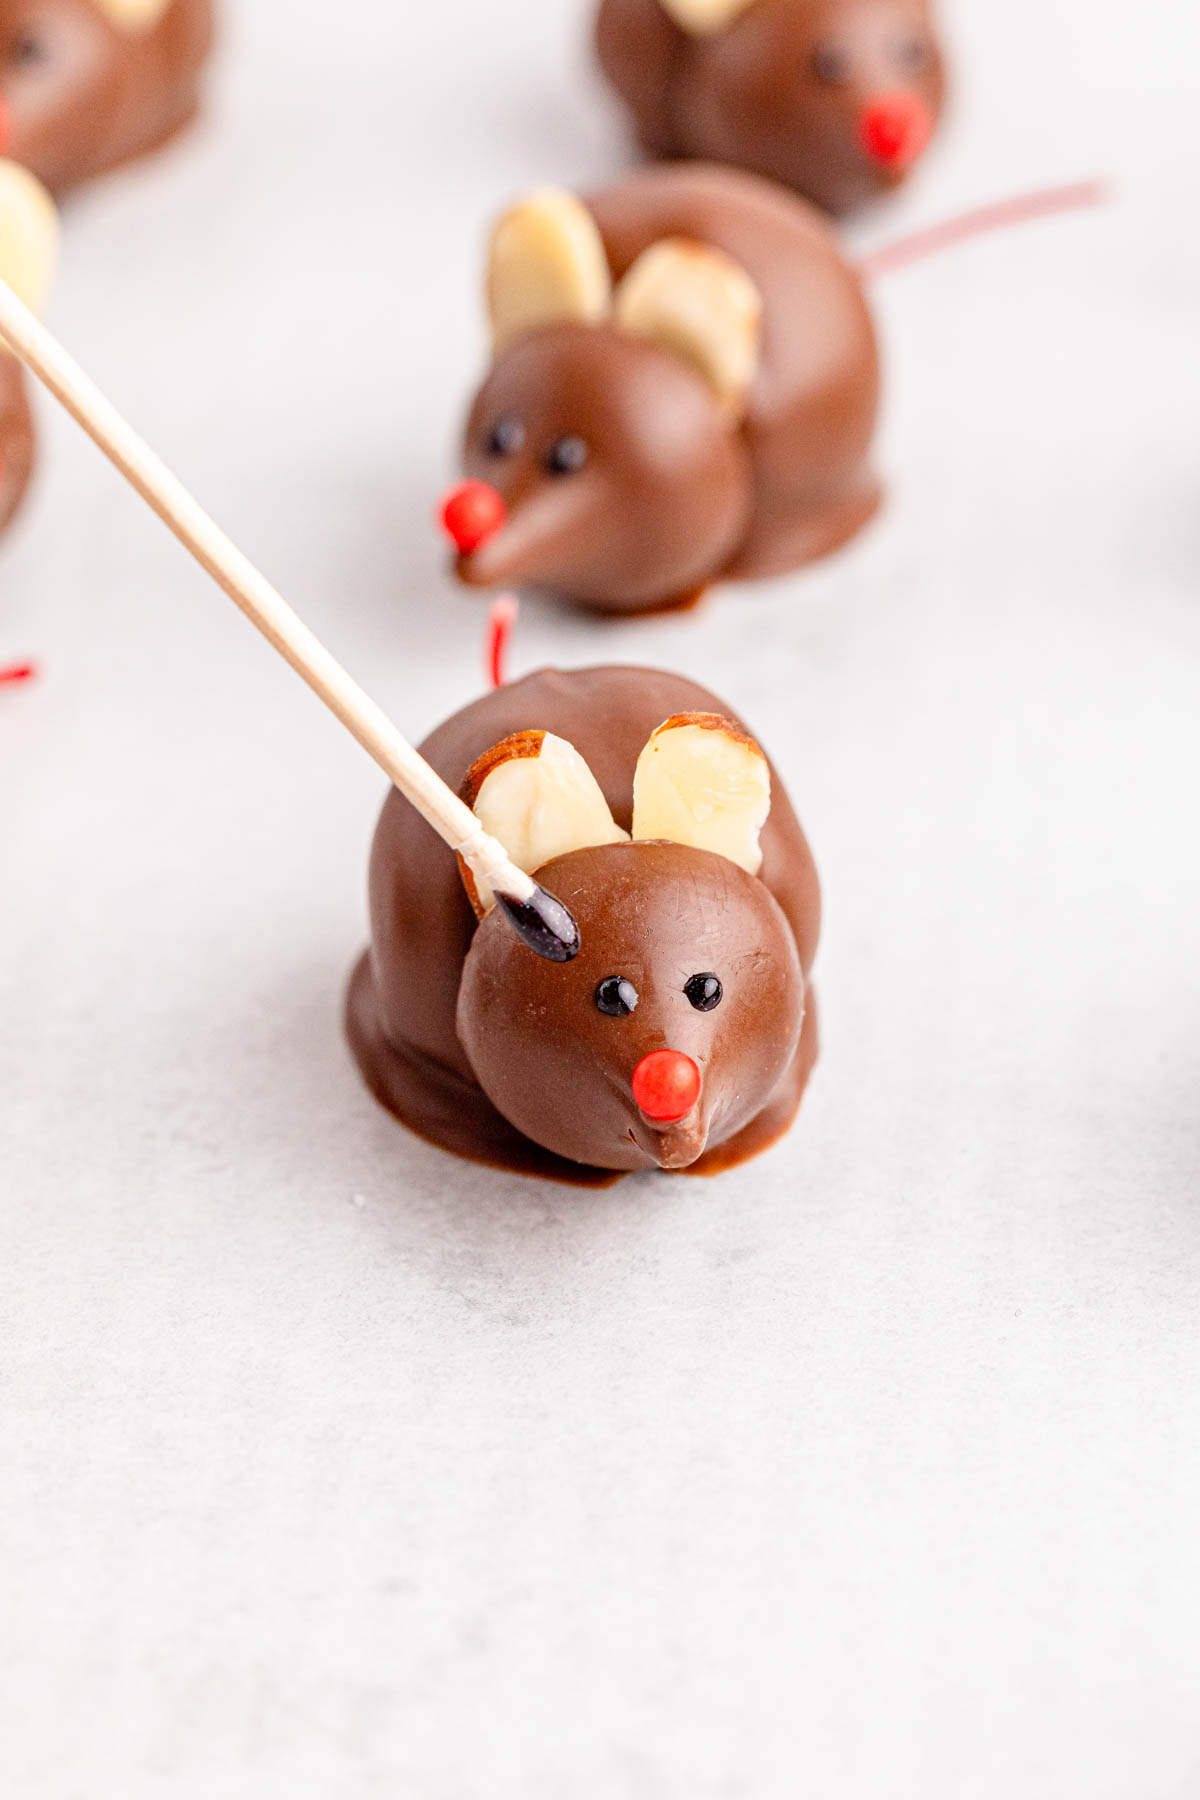 Black eyes being added to a chocolate mouse